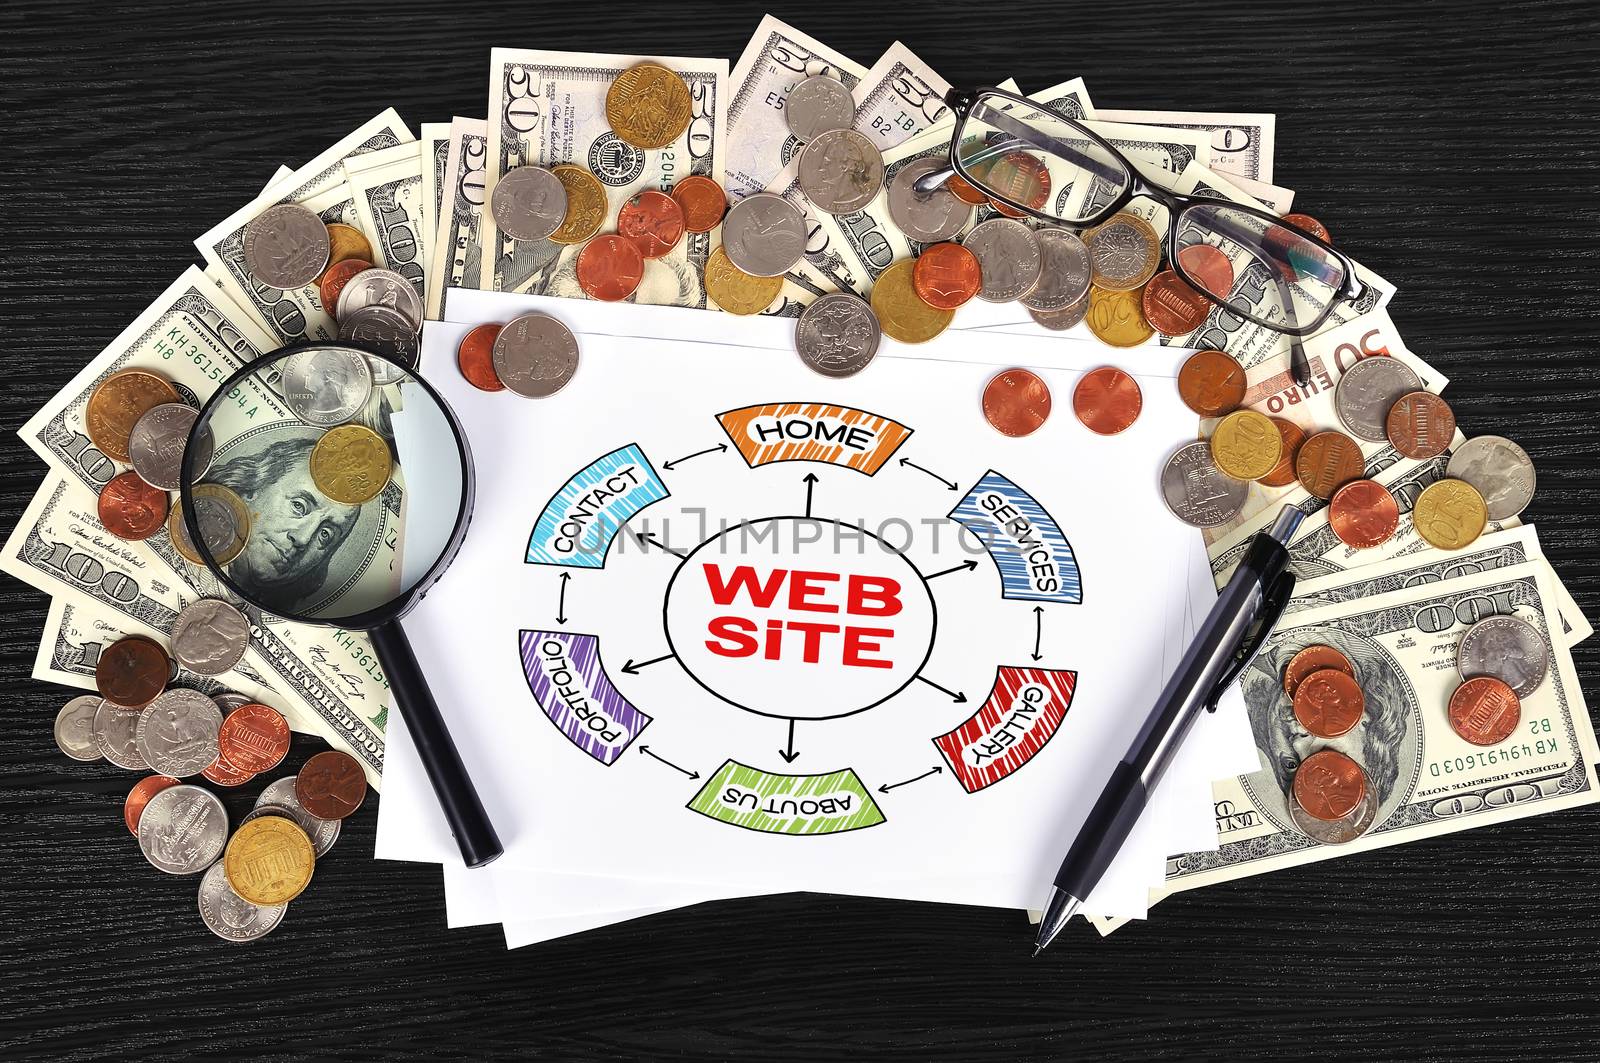 money on table and paper with website scheme